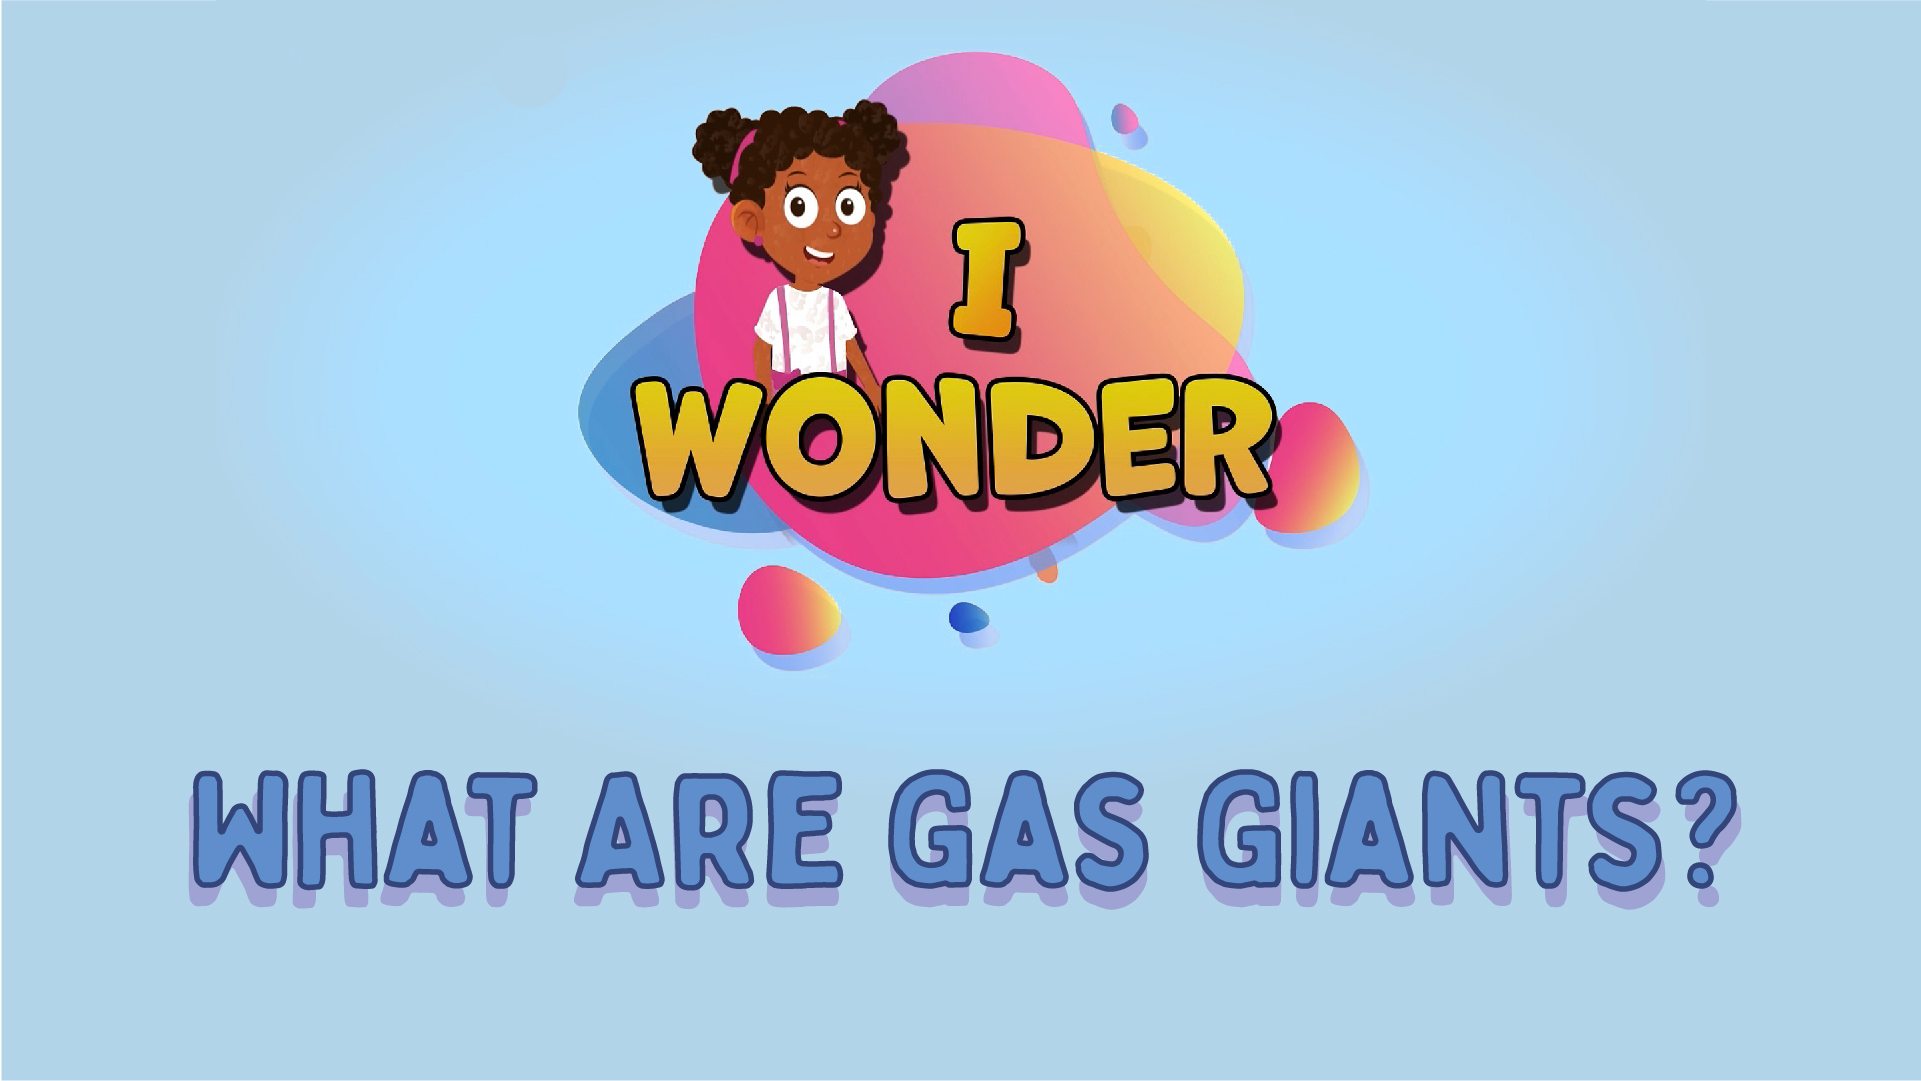 What Are Gas Giants?